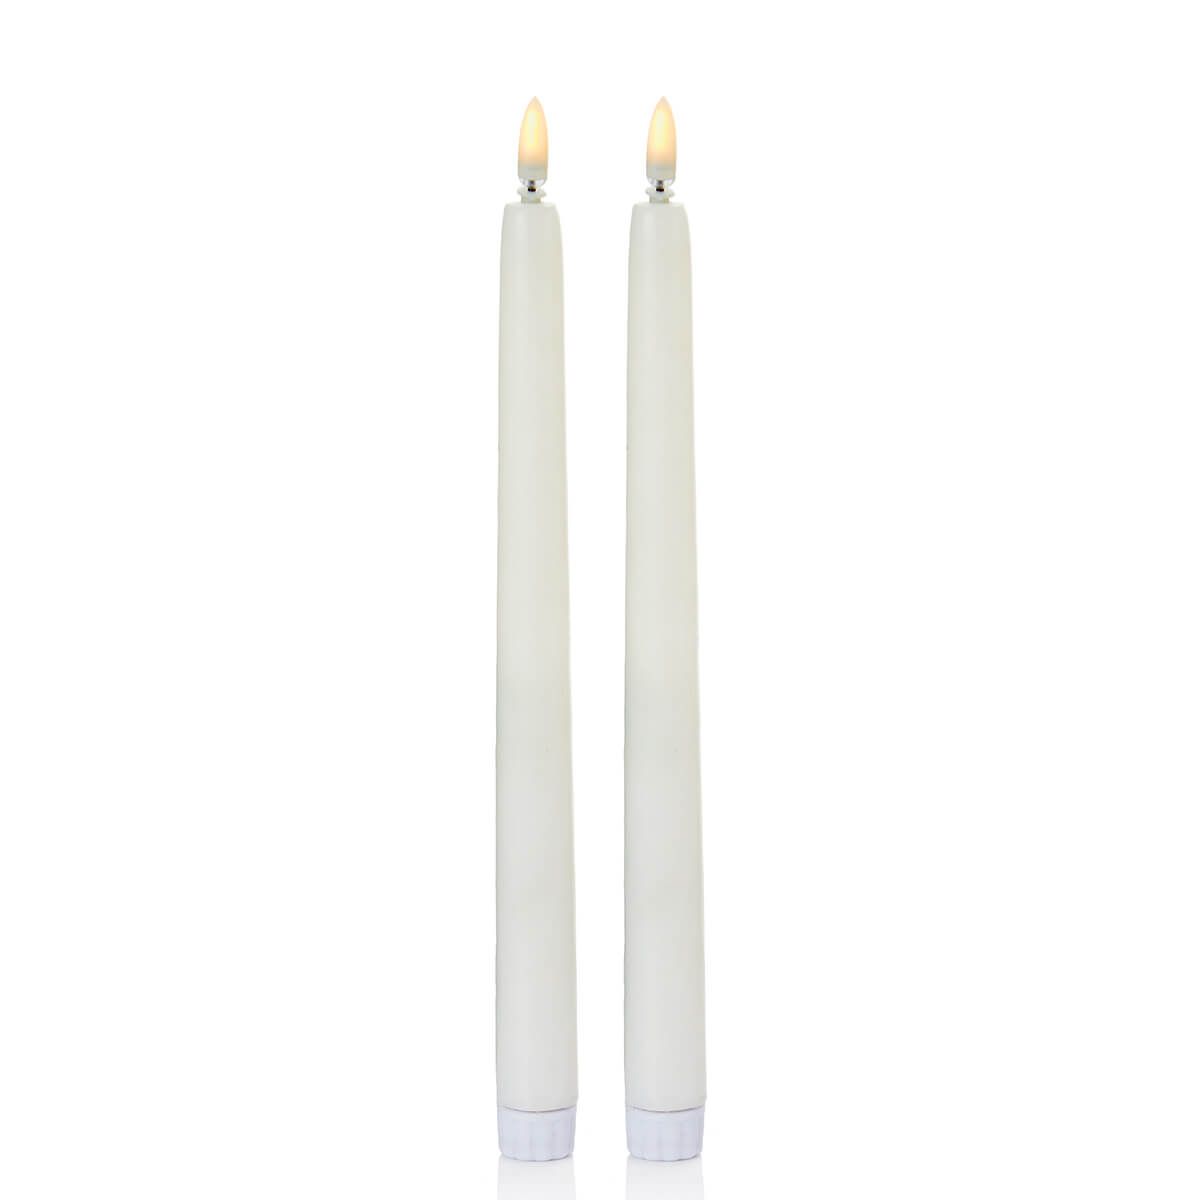 27.5cm Taper Candles - Set of 2